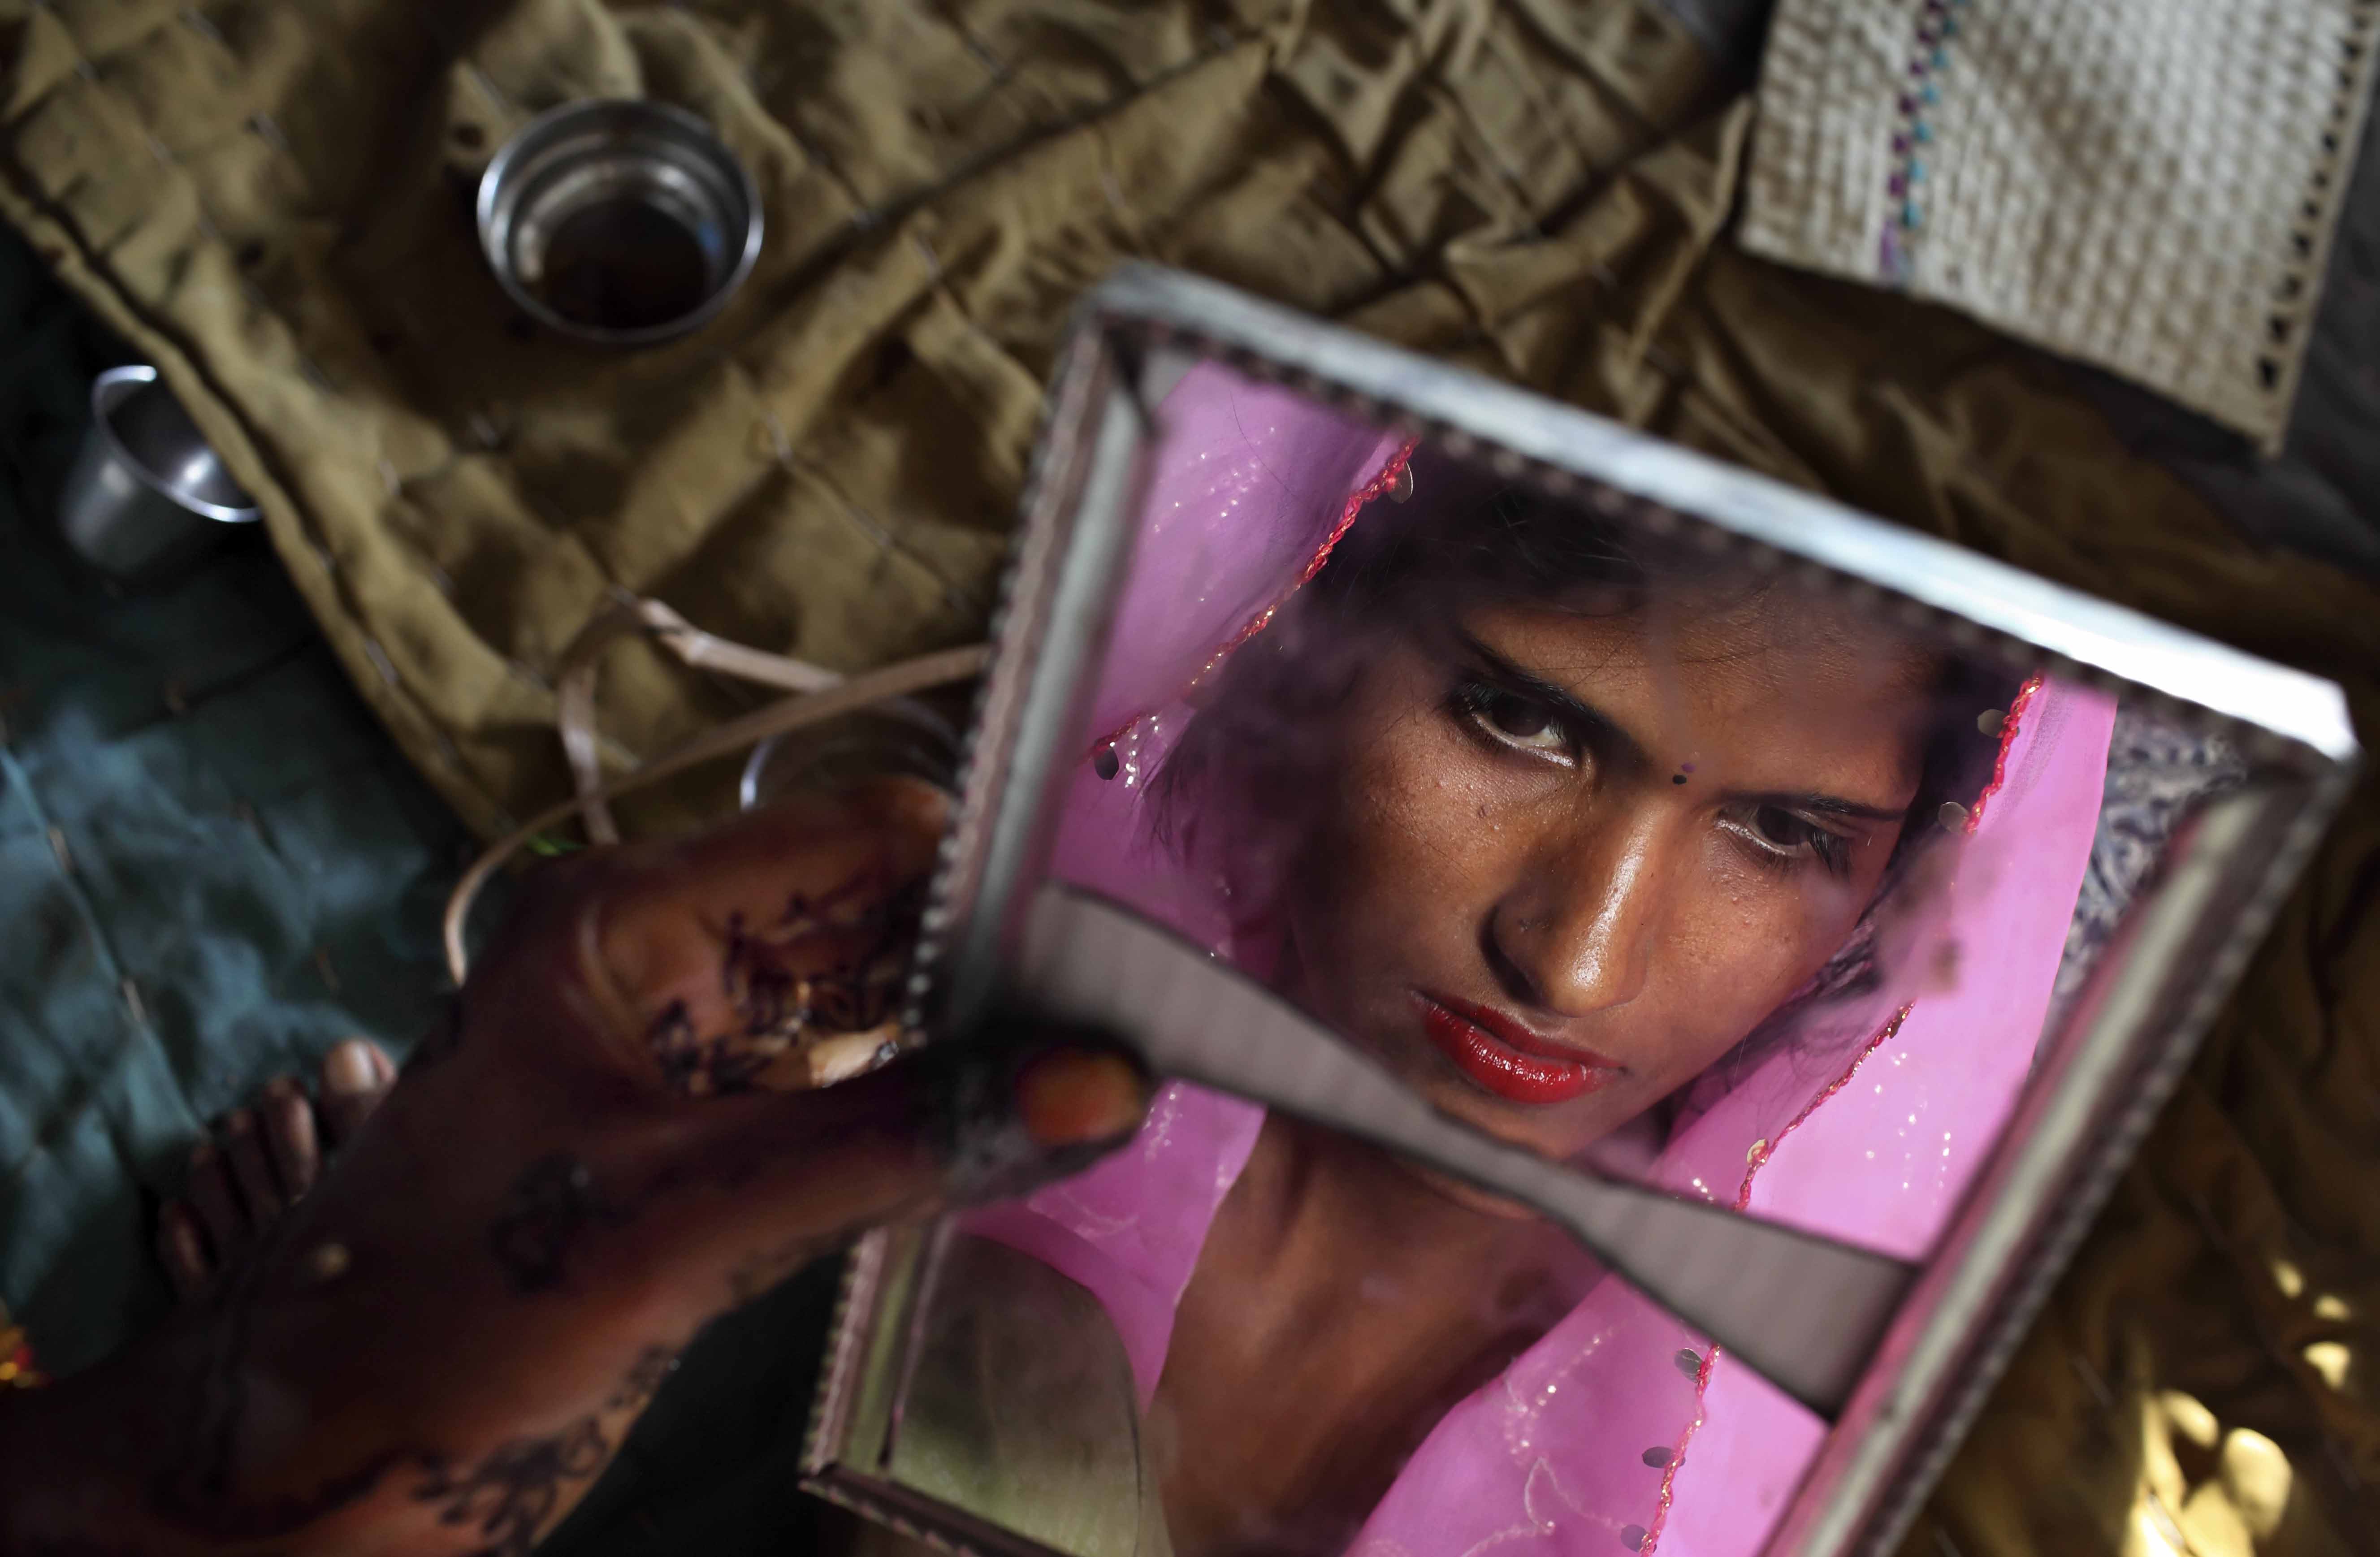 Radha, 15, observes herself in a cracked mirror the day before her wedding. Three young sisters Radha and her two younger sisters were married to three young sibling grooms on the Hindu holy day of Akshaya Tritiya in North India.